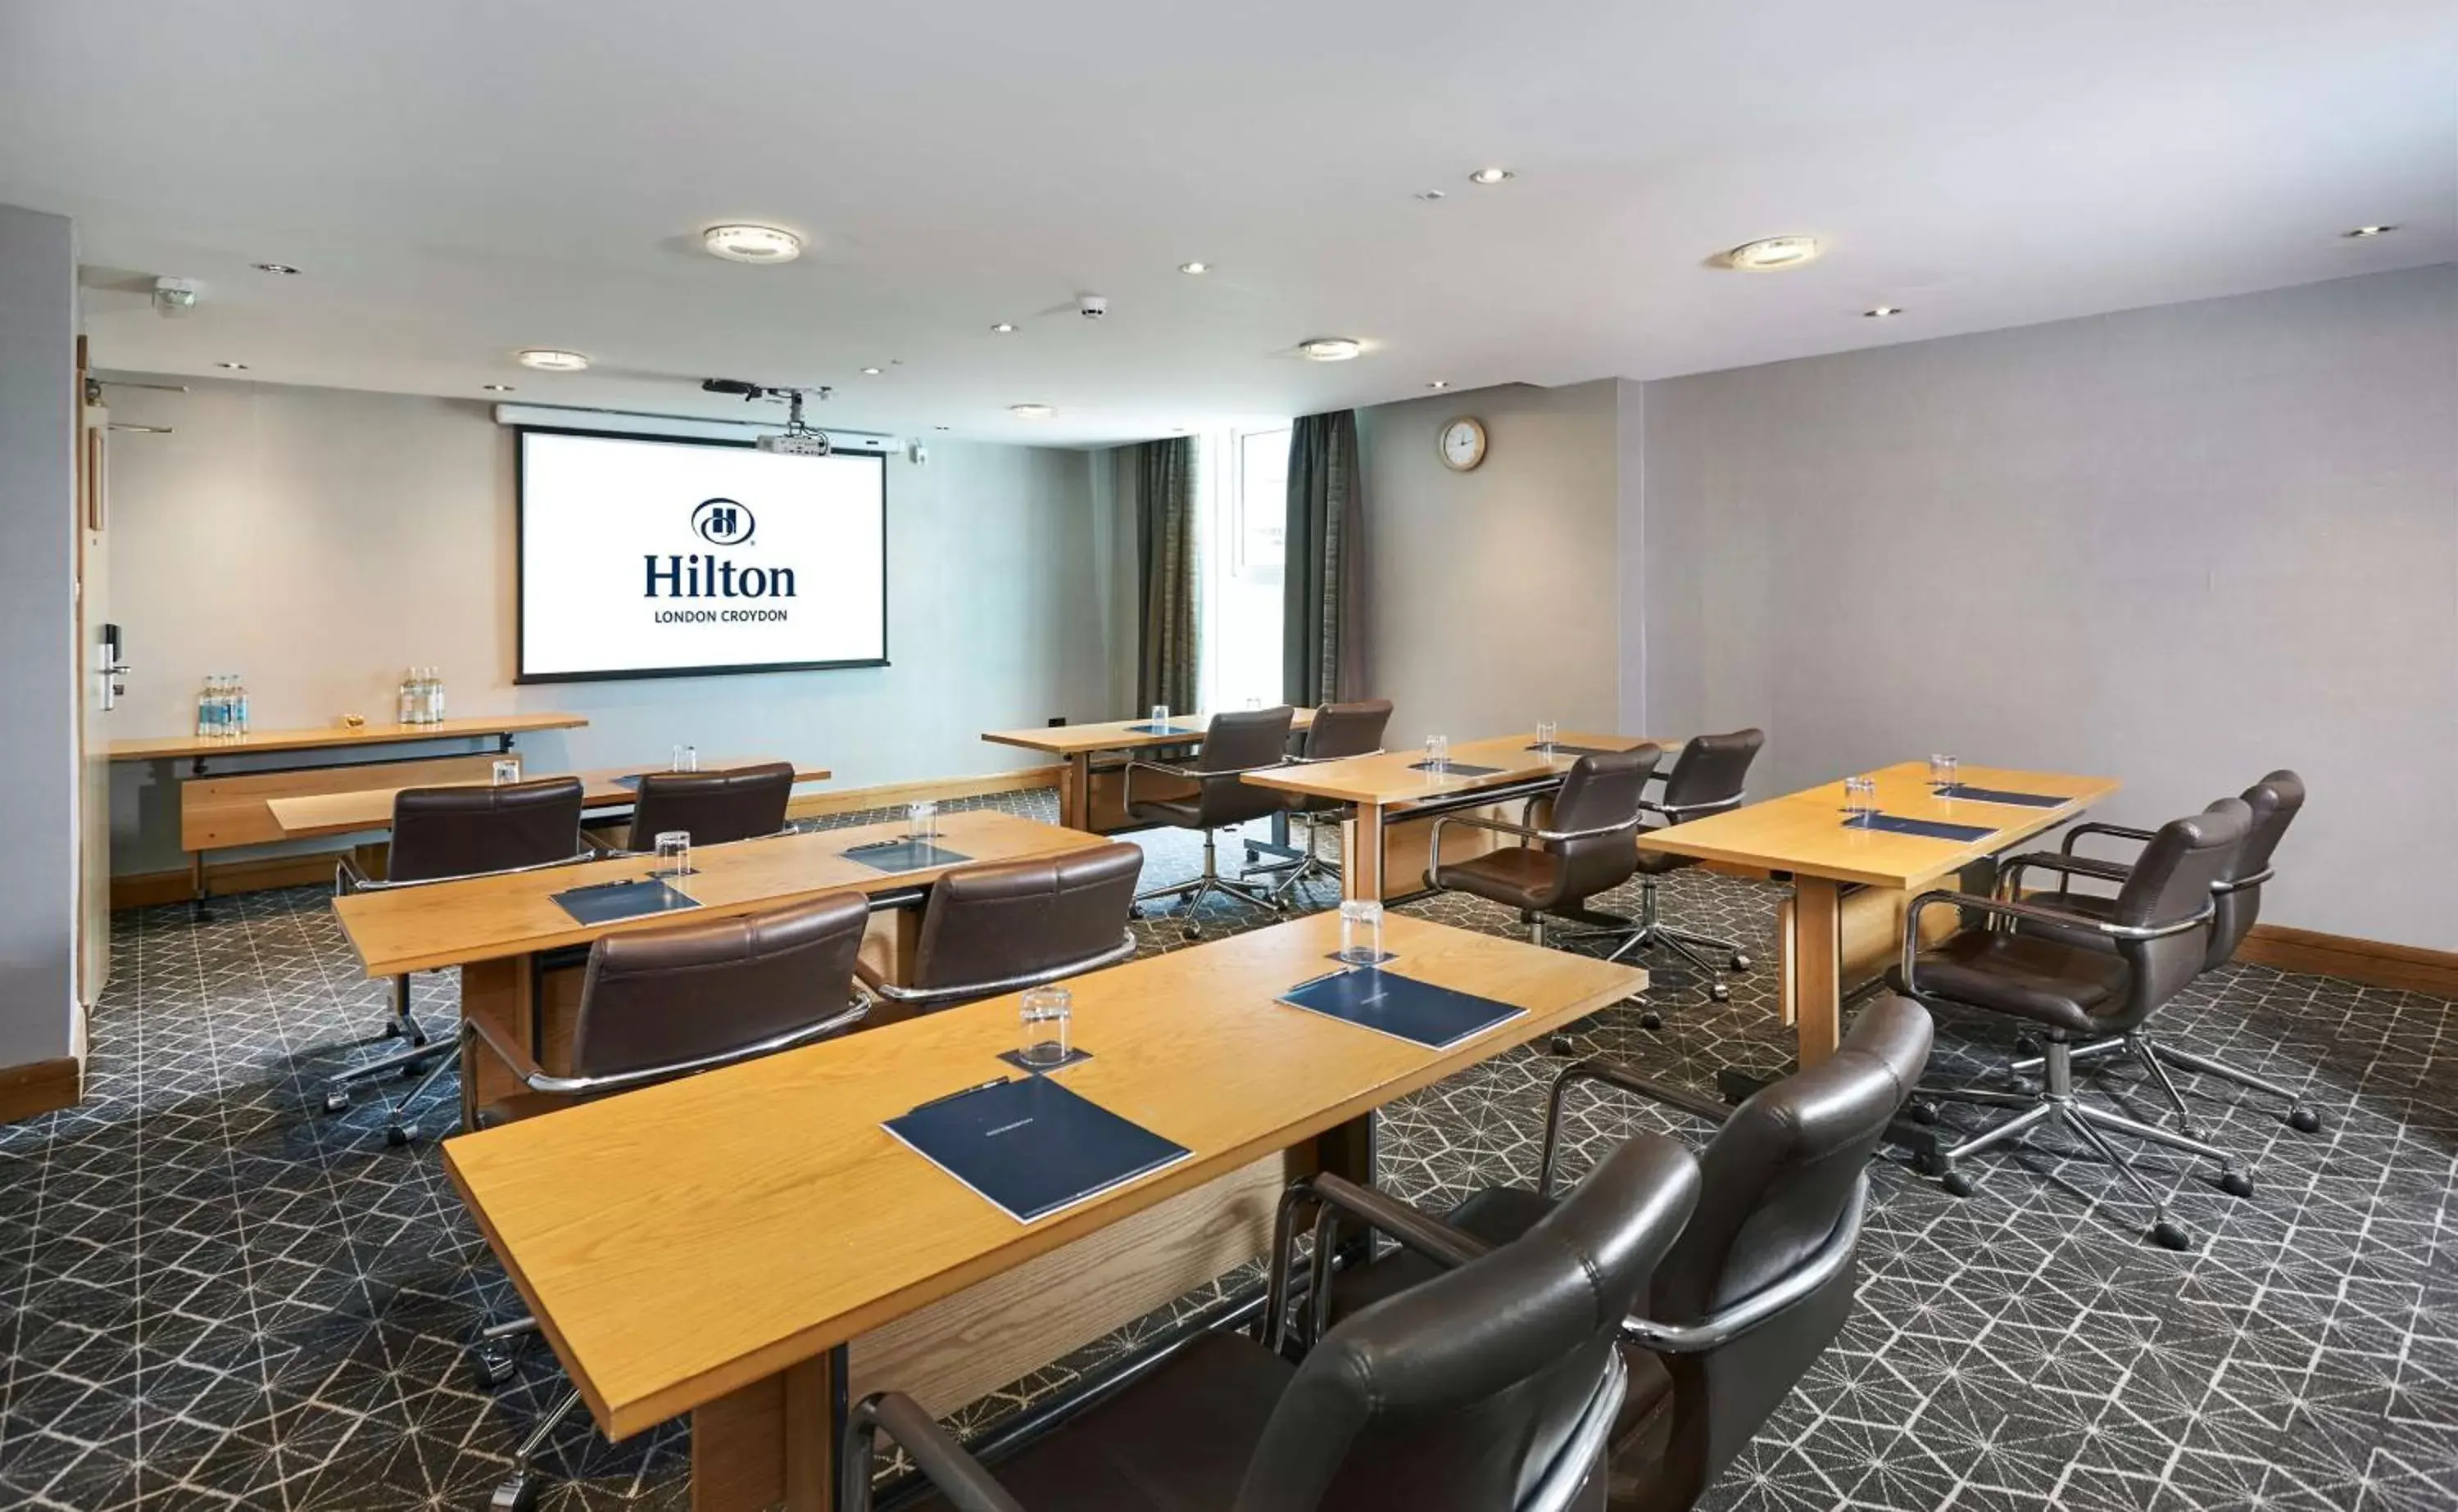 Meeting/conference room in Hilton London Croydon